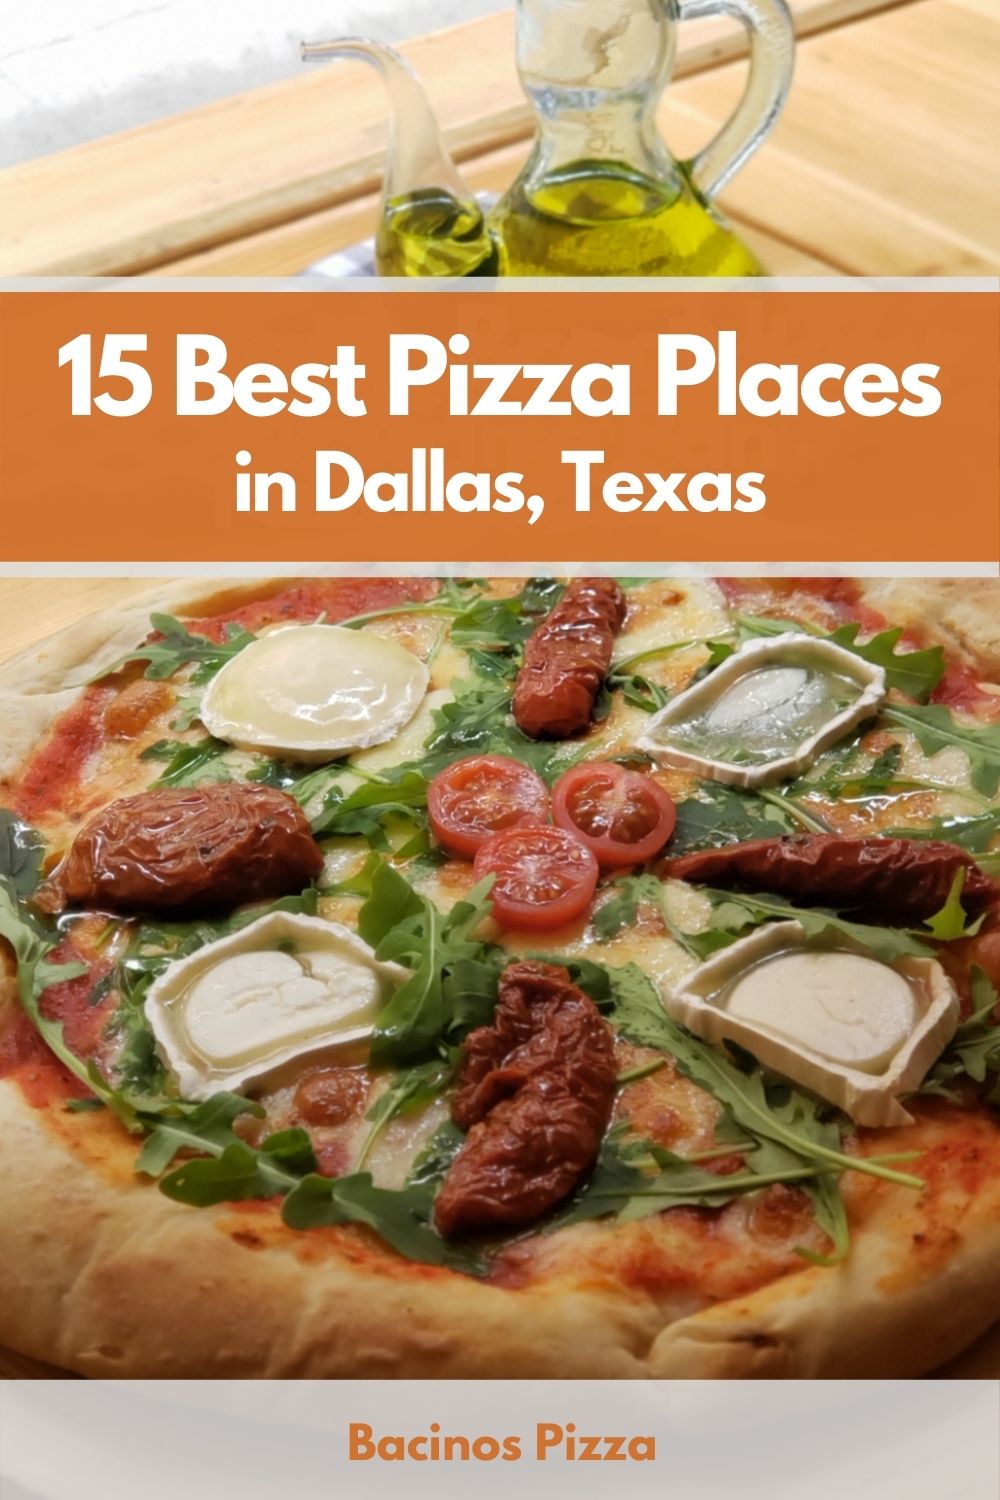 15 Best Pizza Places in Dallas, Texas pin 2